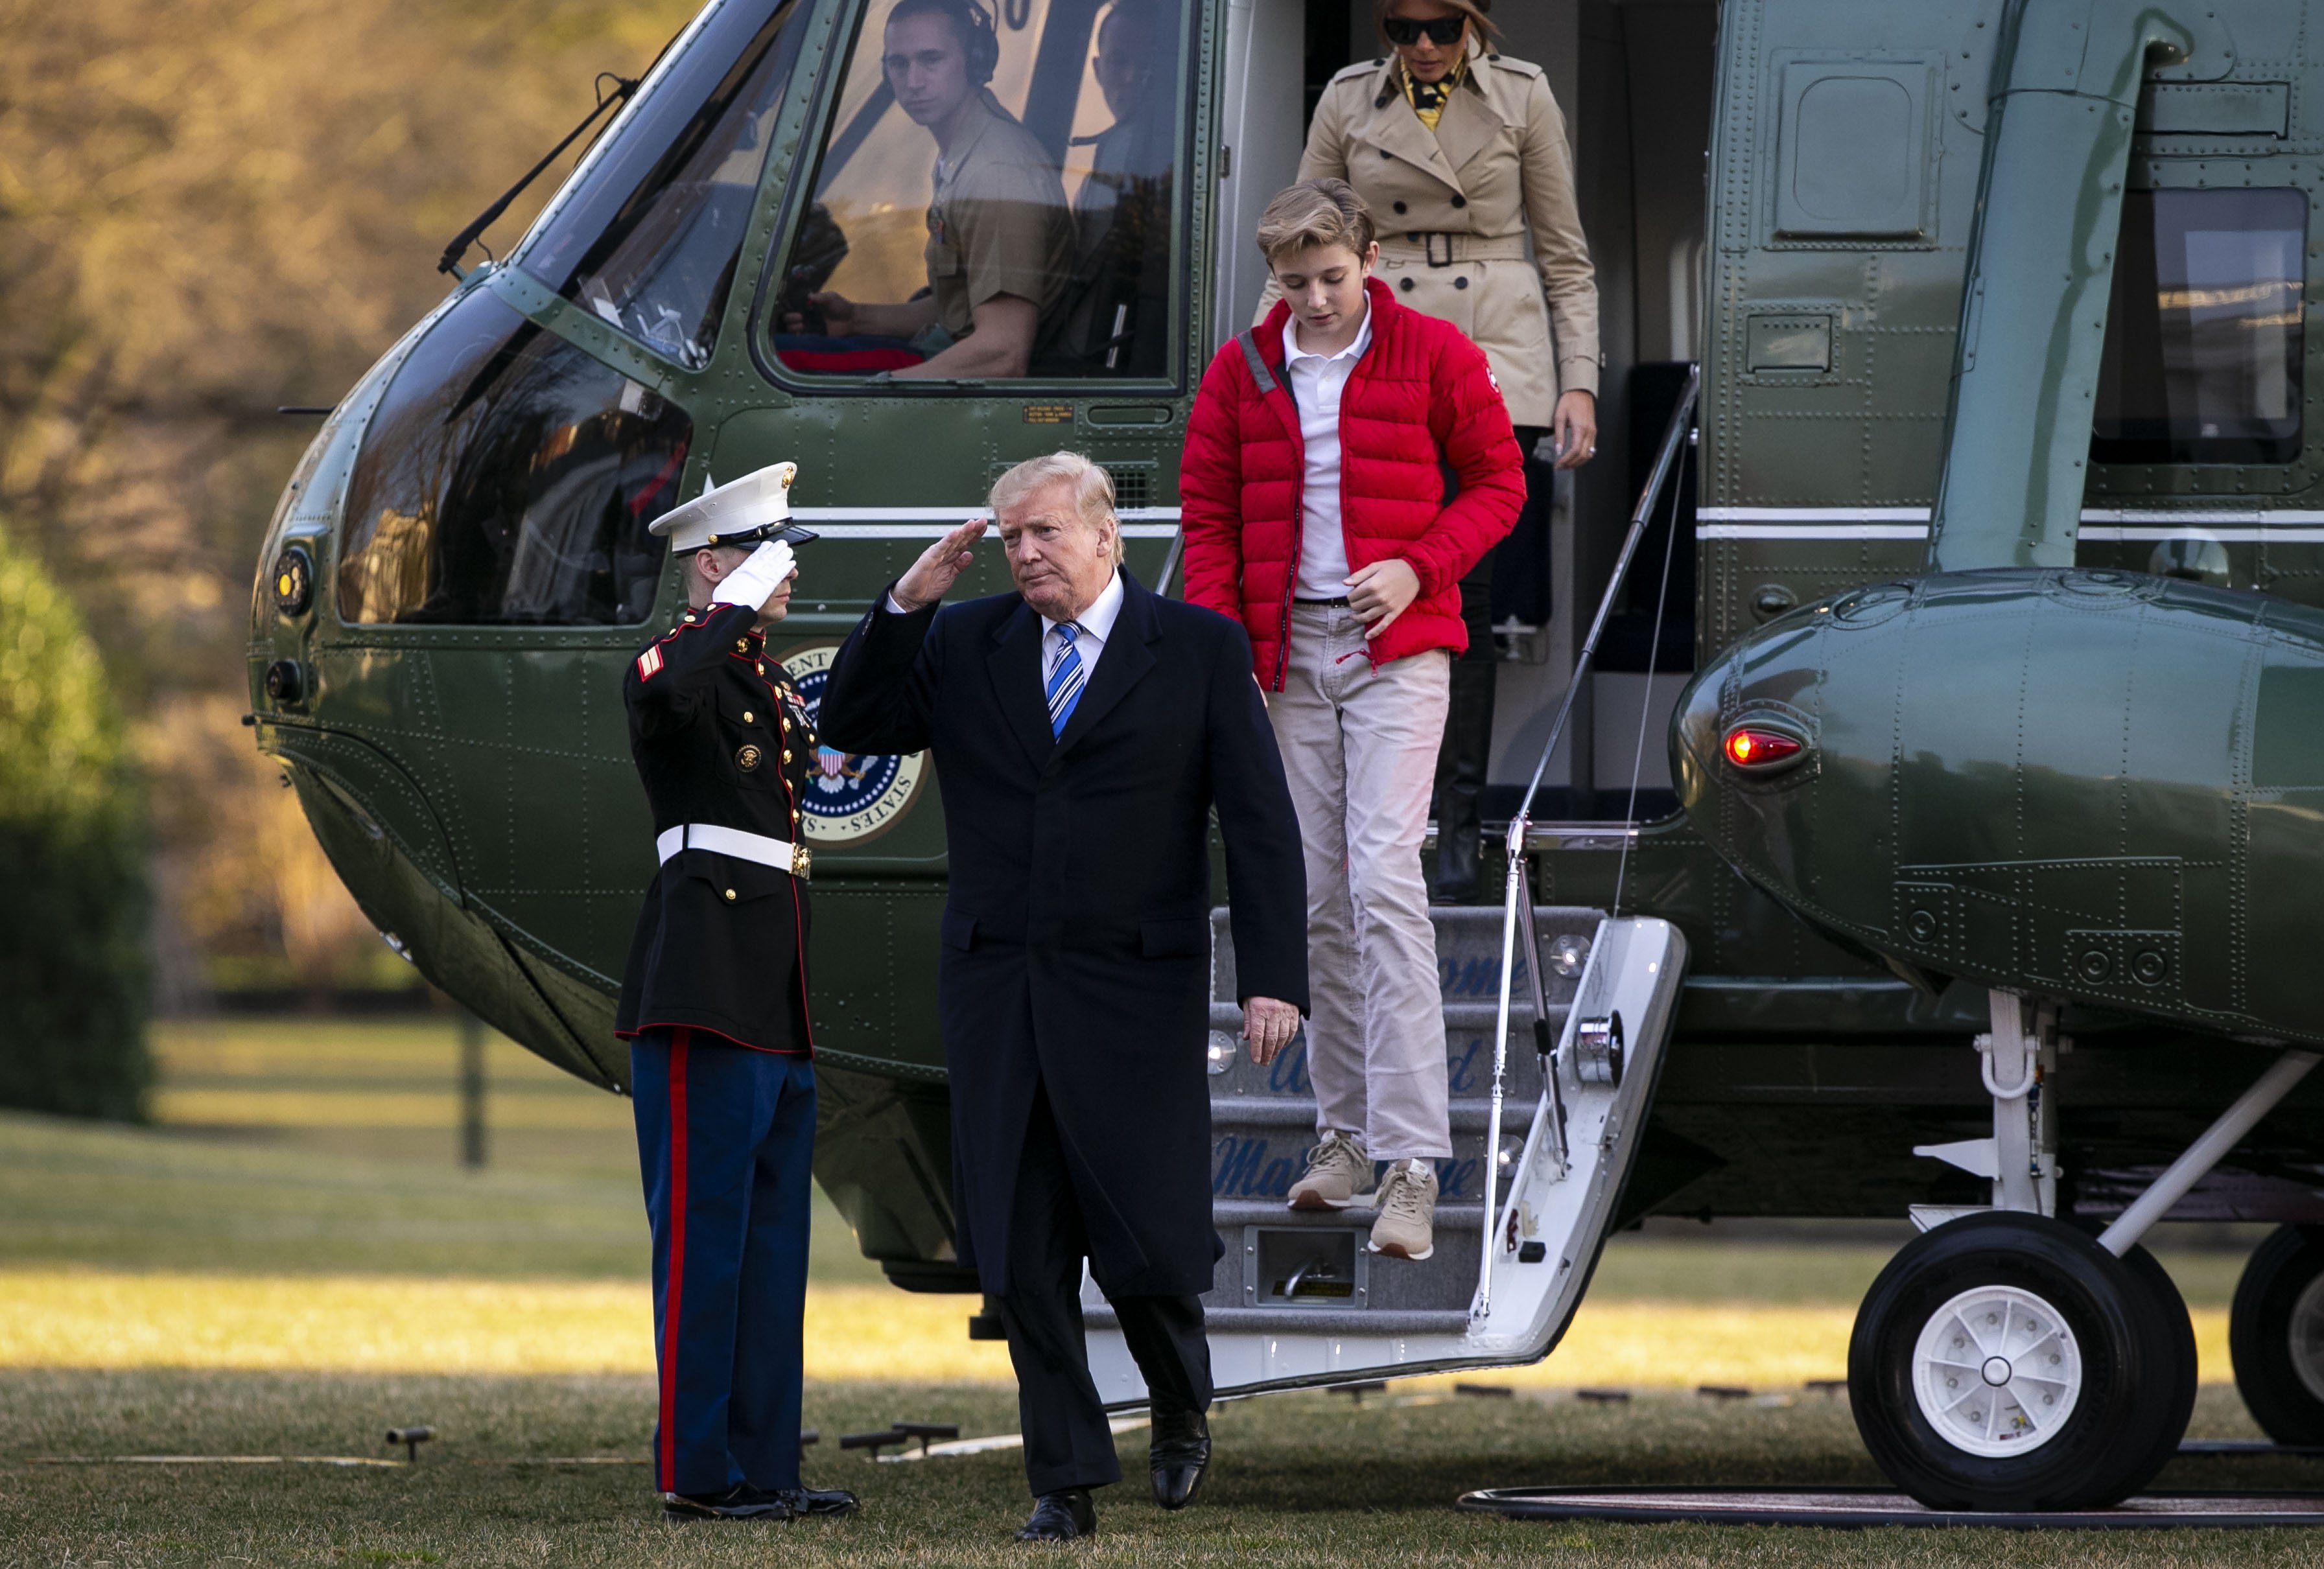 Donald Trump stepping off of Marine One Melania Trump and their son Barron Trump on the South Lawn of the White House, in Washington, DC | Photo: Getty Images